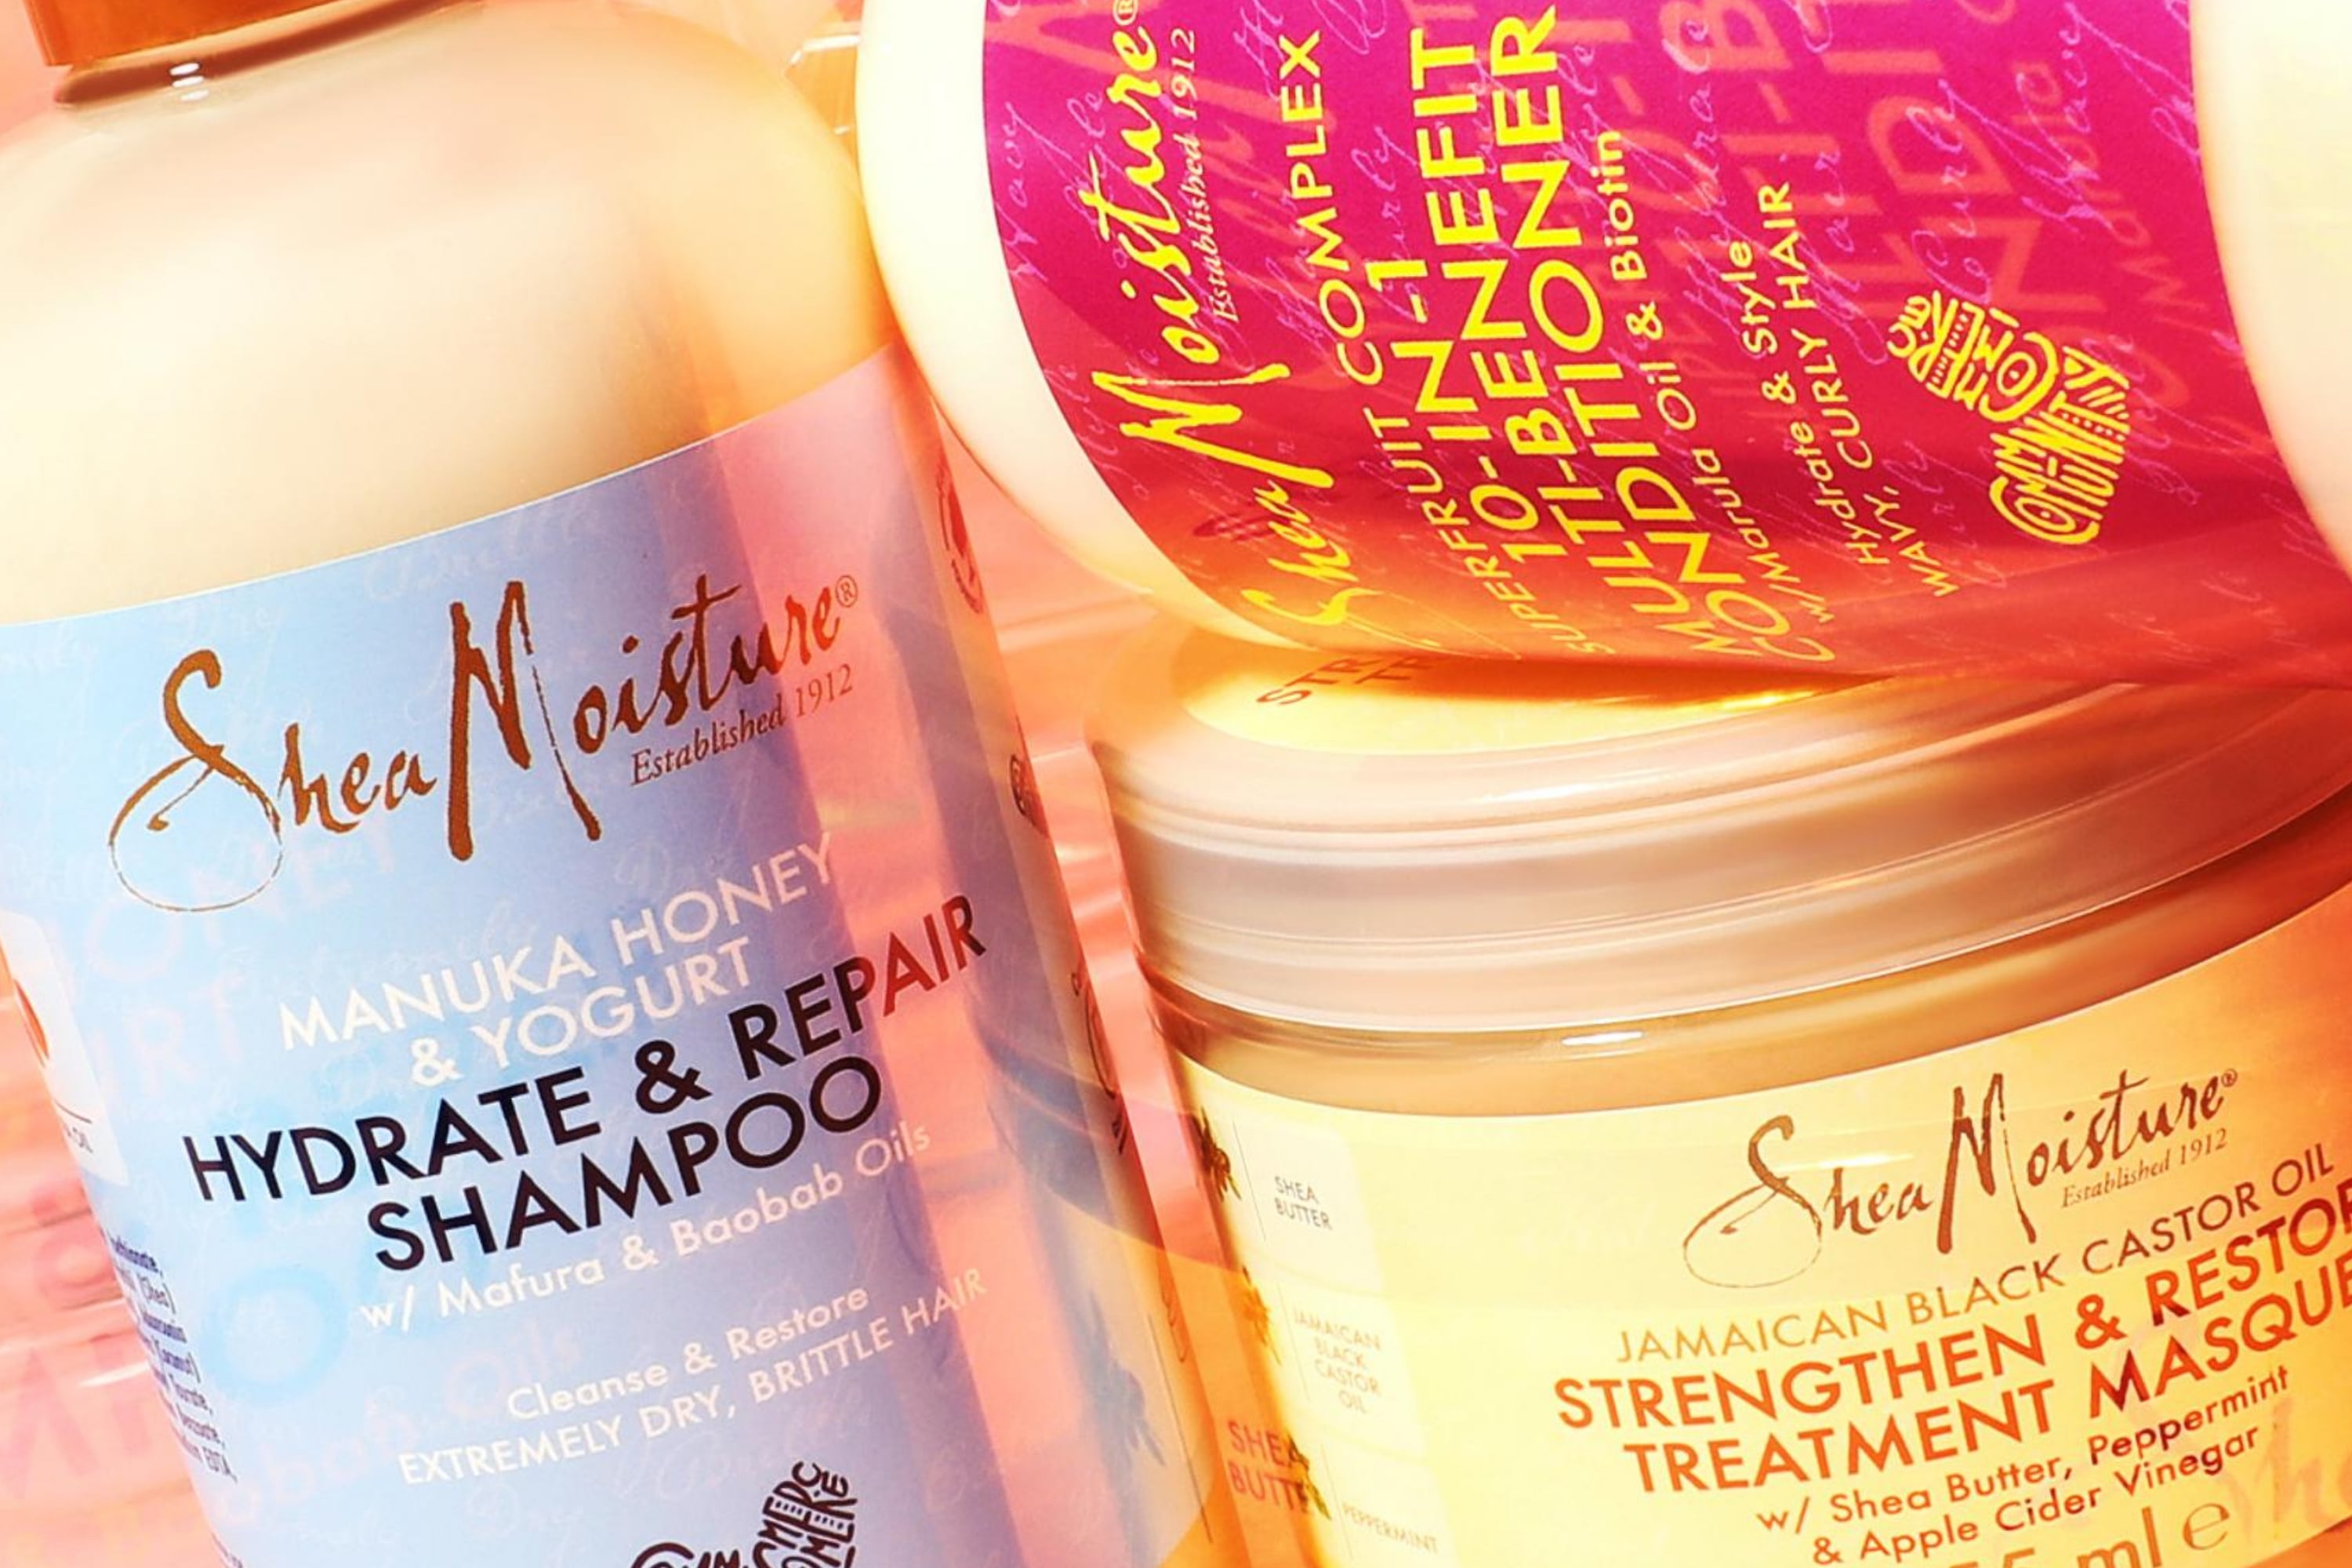 How Should Shea Moisture Products Be Used